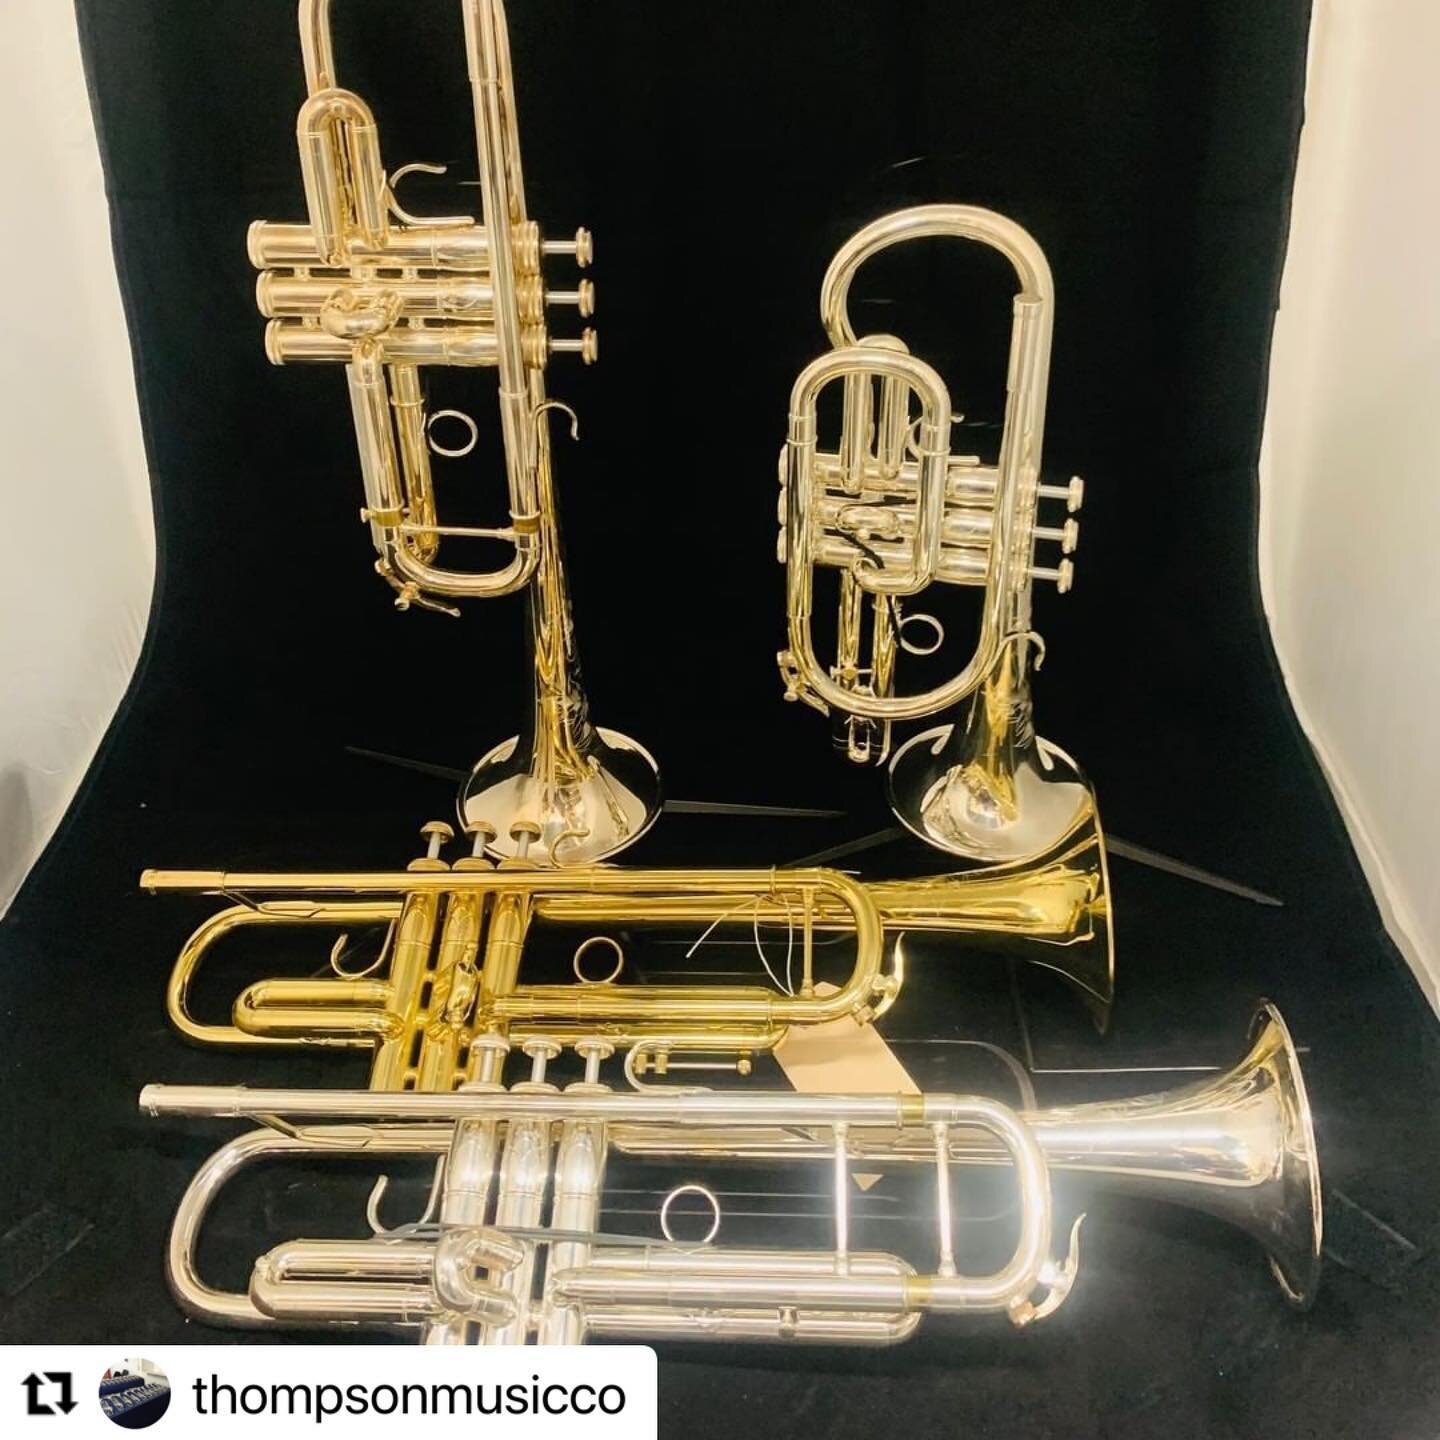 Christmas may be over but Yule love these horns! #iplayshires #seshires #shirestrumpet #trumpet #brass  #Repost @thompsonmusicco with @make_repost
・・・
#seshires #az #cvla #7a #4f #trumpet #ctrumpet #bbtrumpet #cornet #classicaltrumpet #jazztrumpet #b